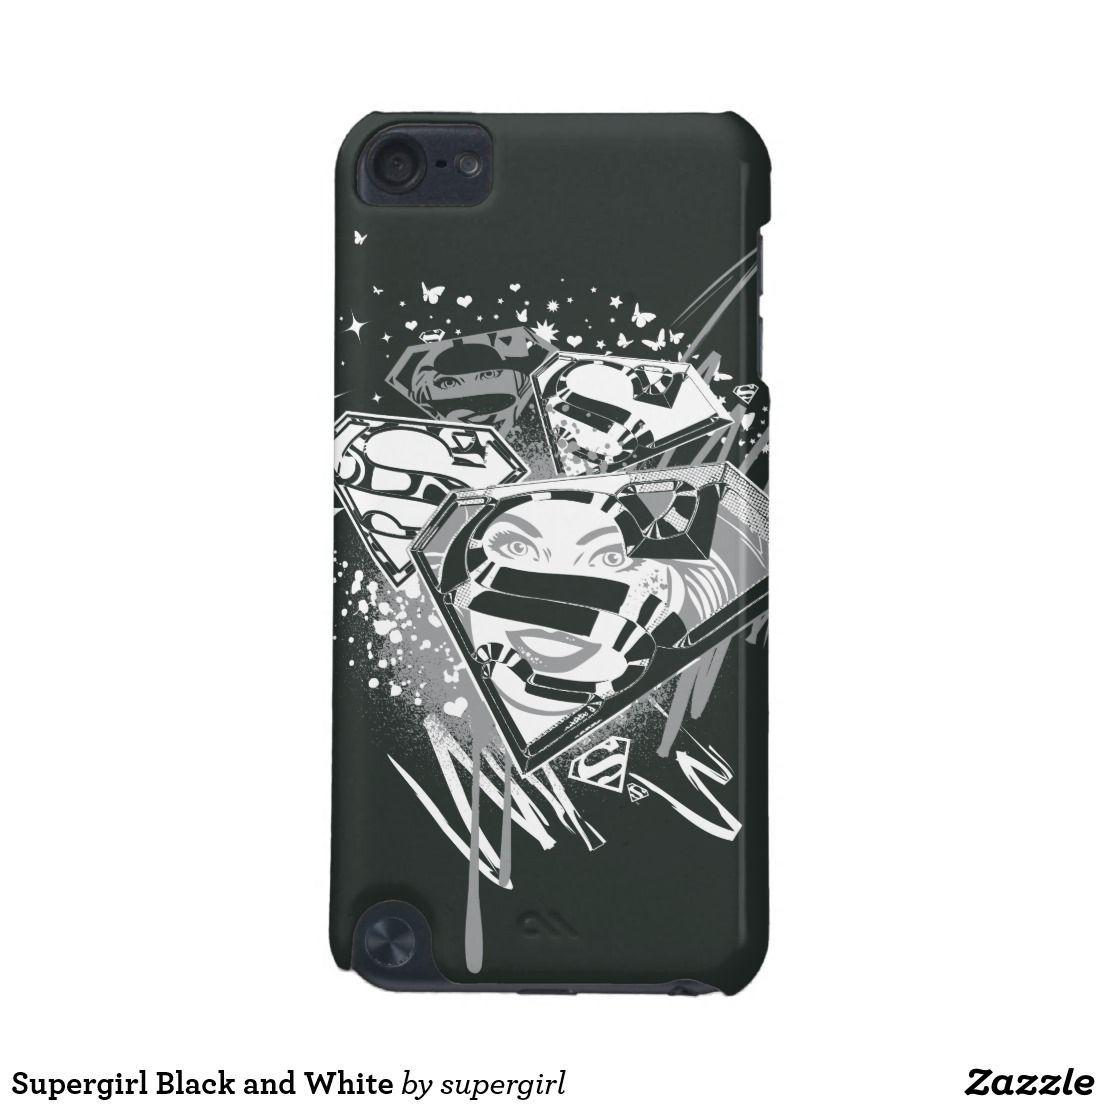 5th Comic Book Style Logo - Supergirl Black and White iPod Touch (5th Generation) Case